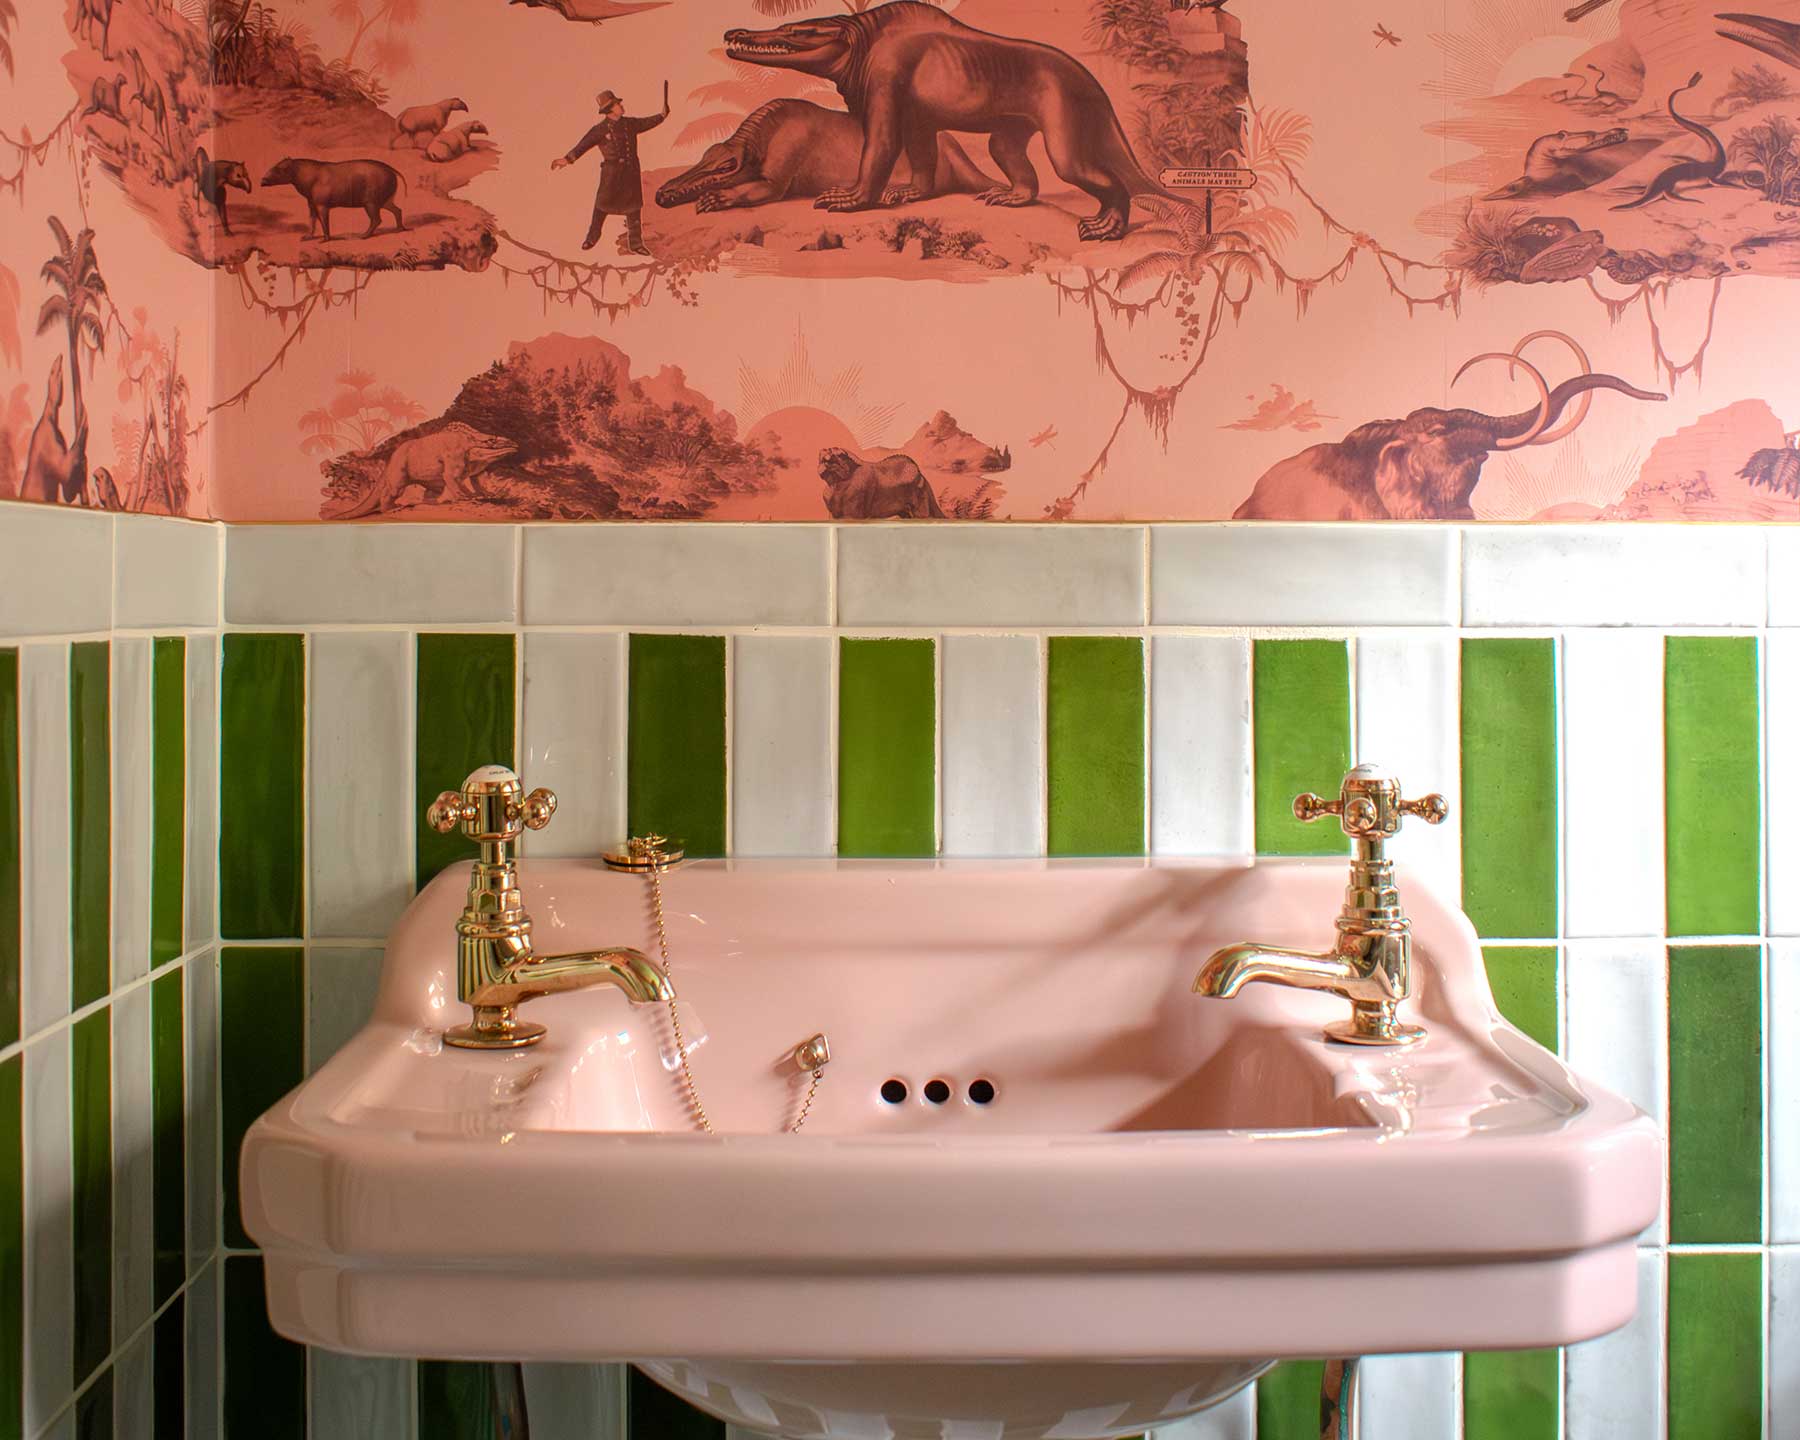 Mix wallpaper with tiles for a modern update in a Victorian home